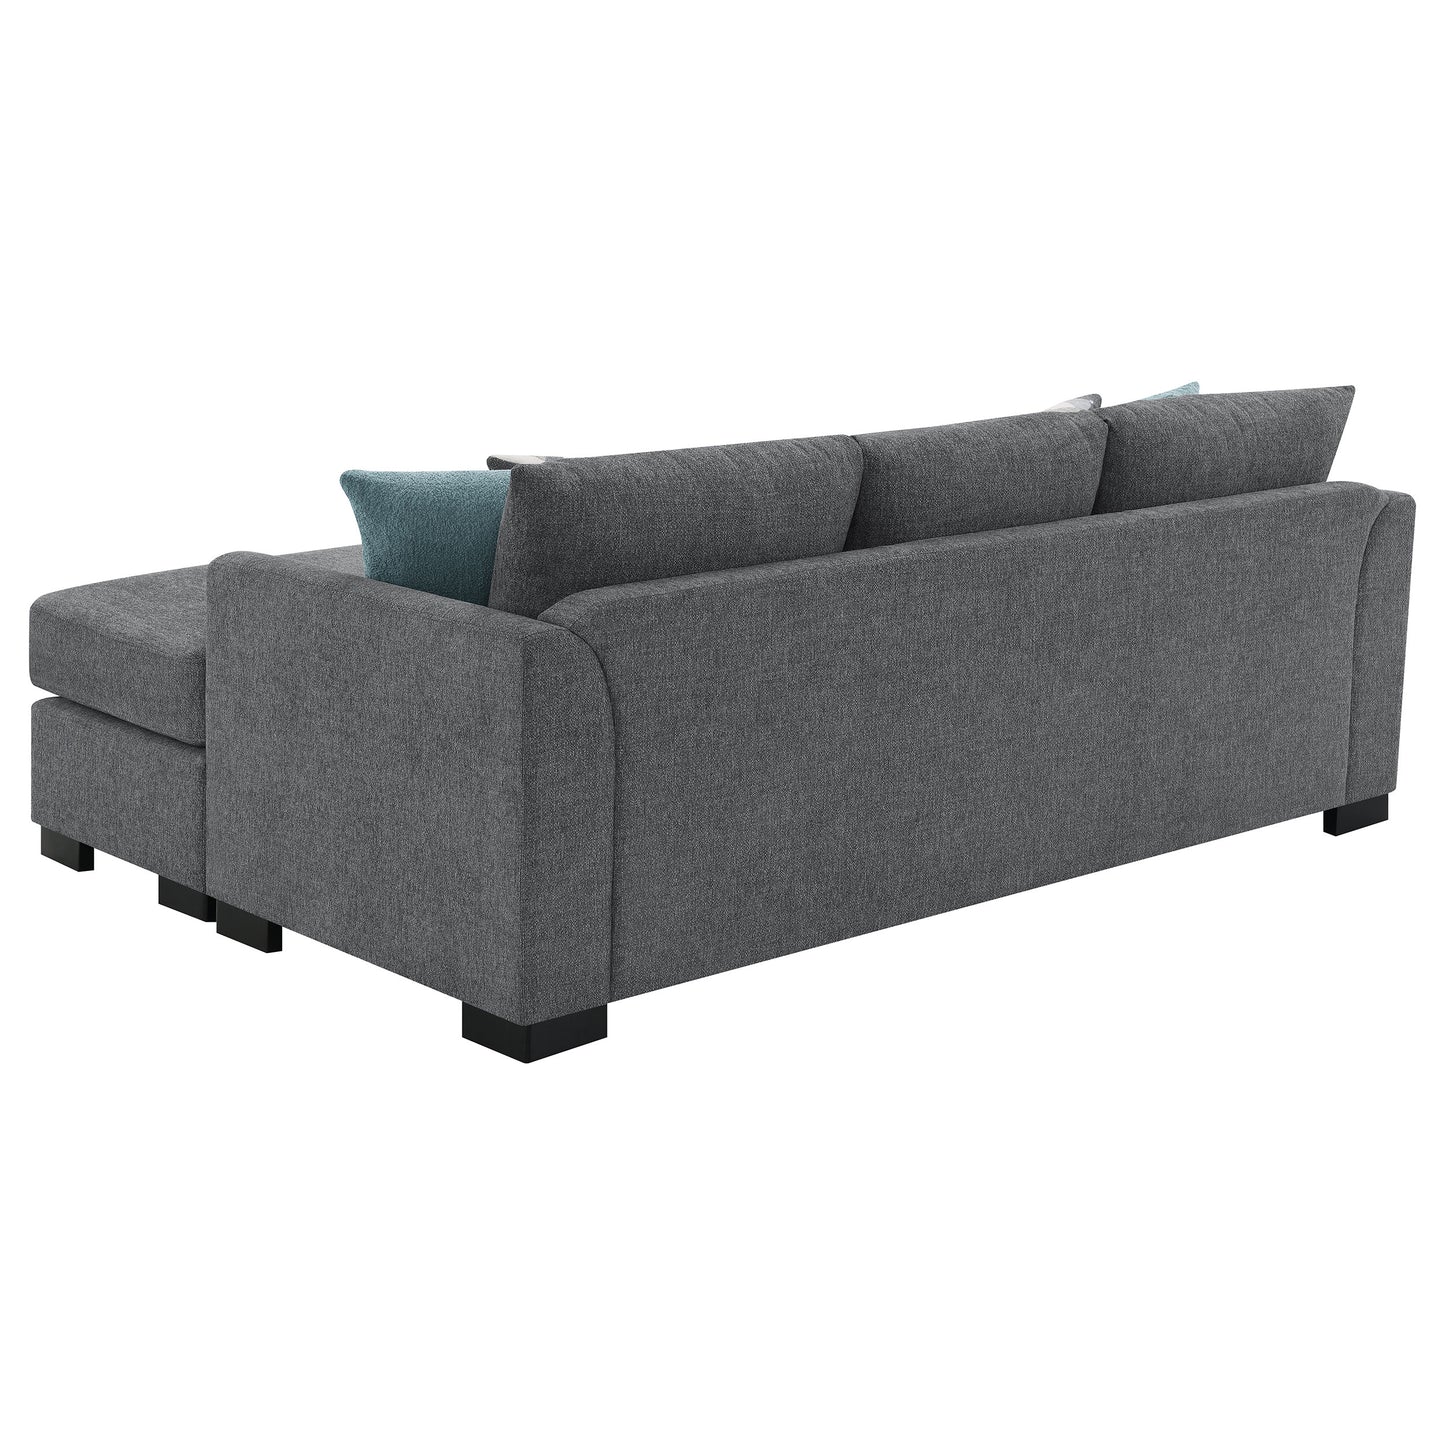 Storey Upholstered Sleeper Sectional Chaise Sofa Grey